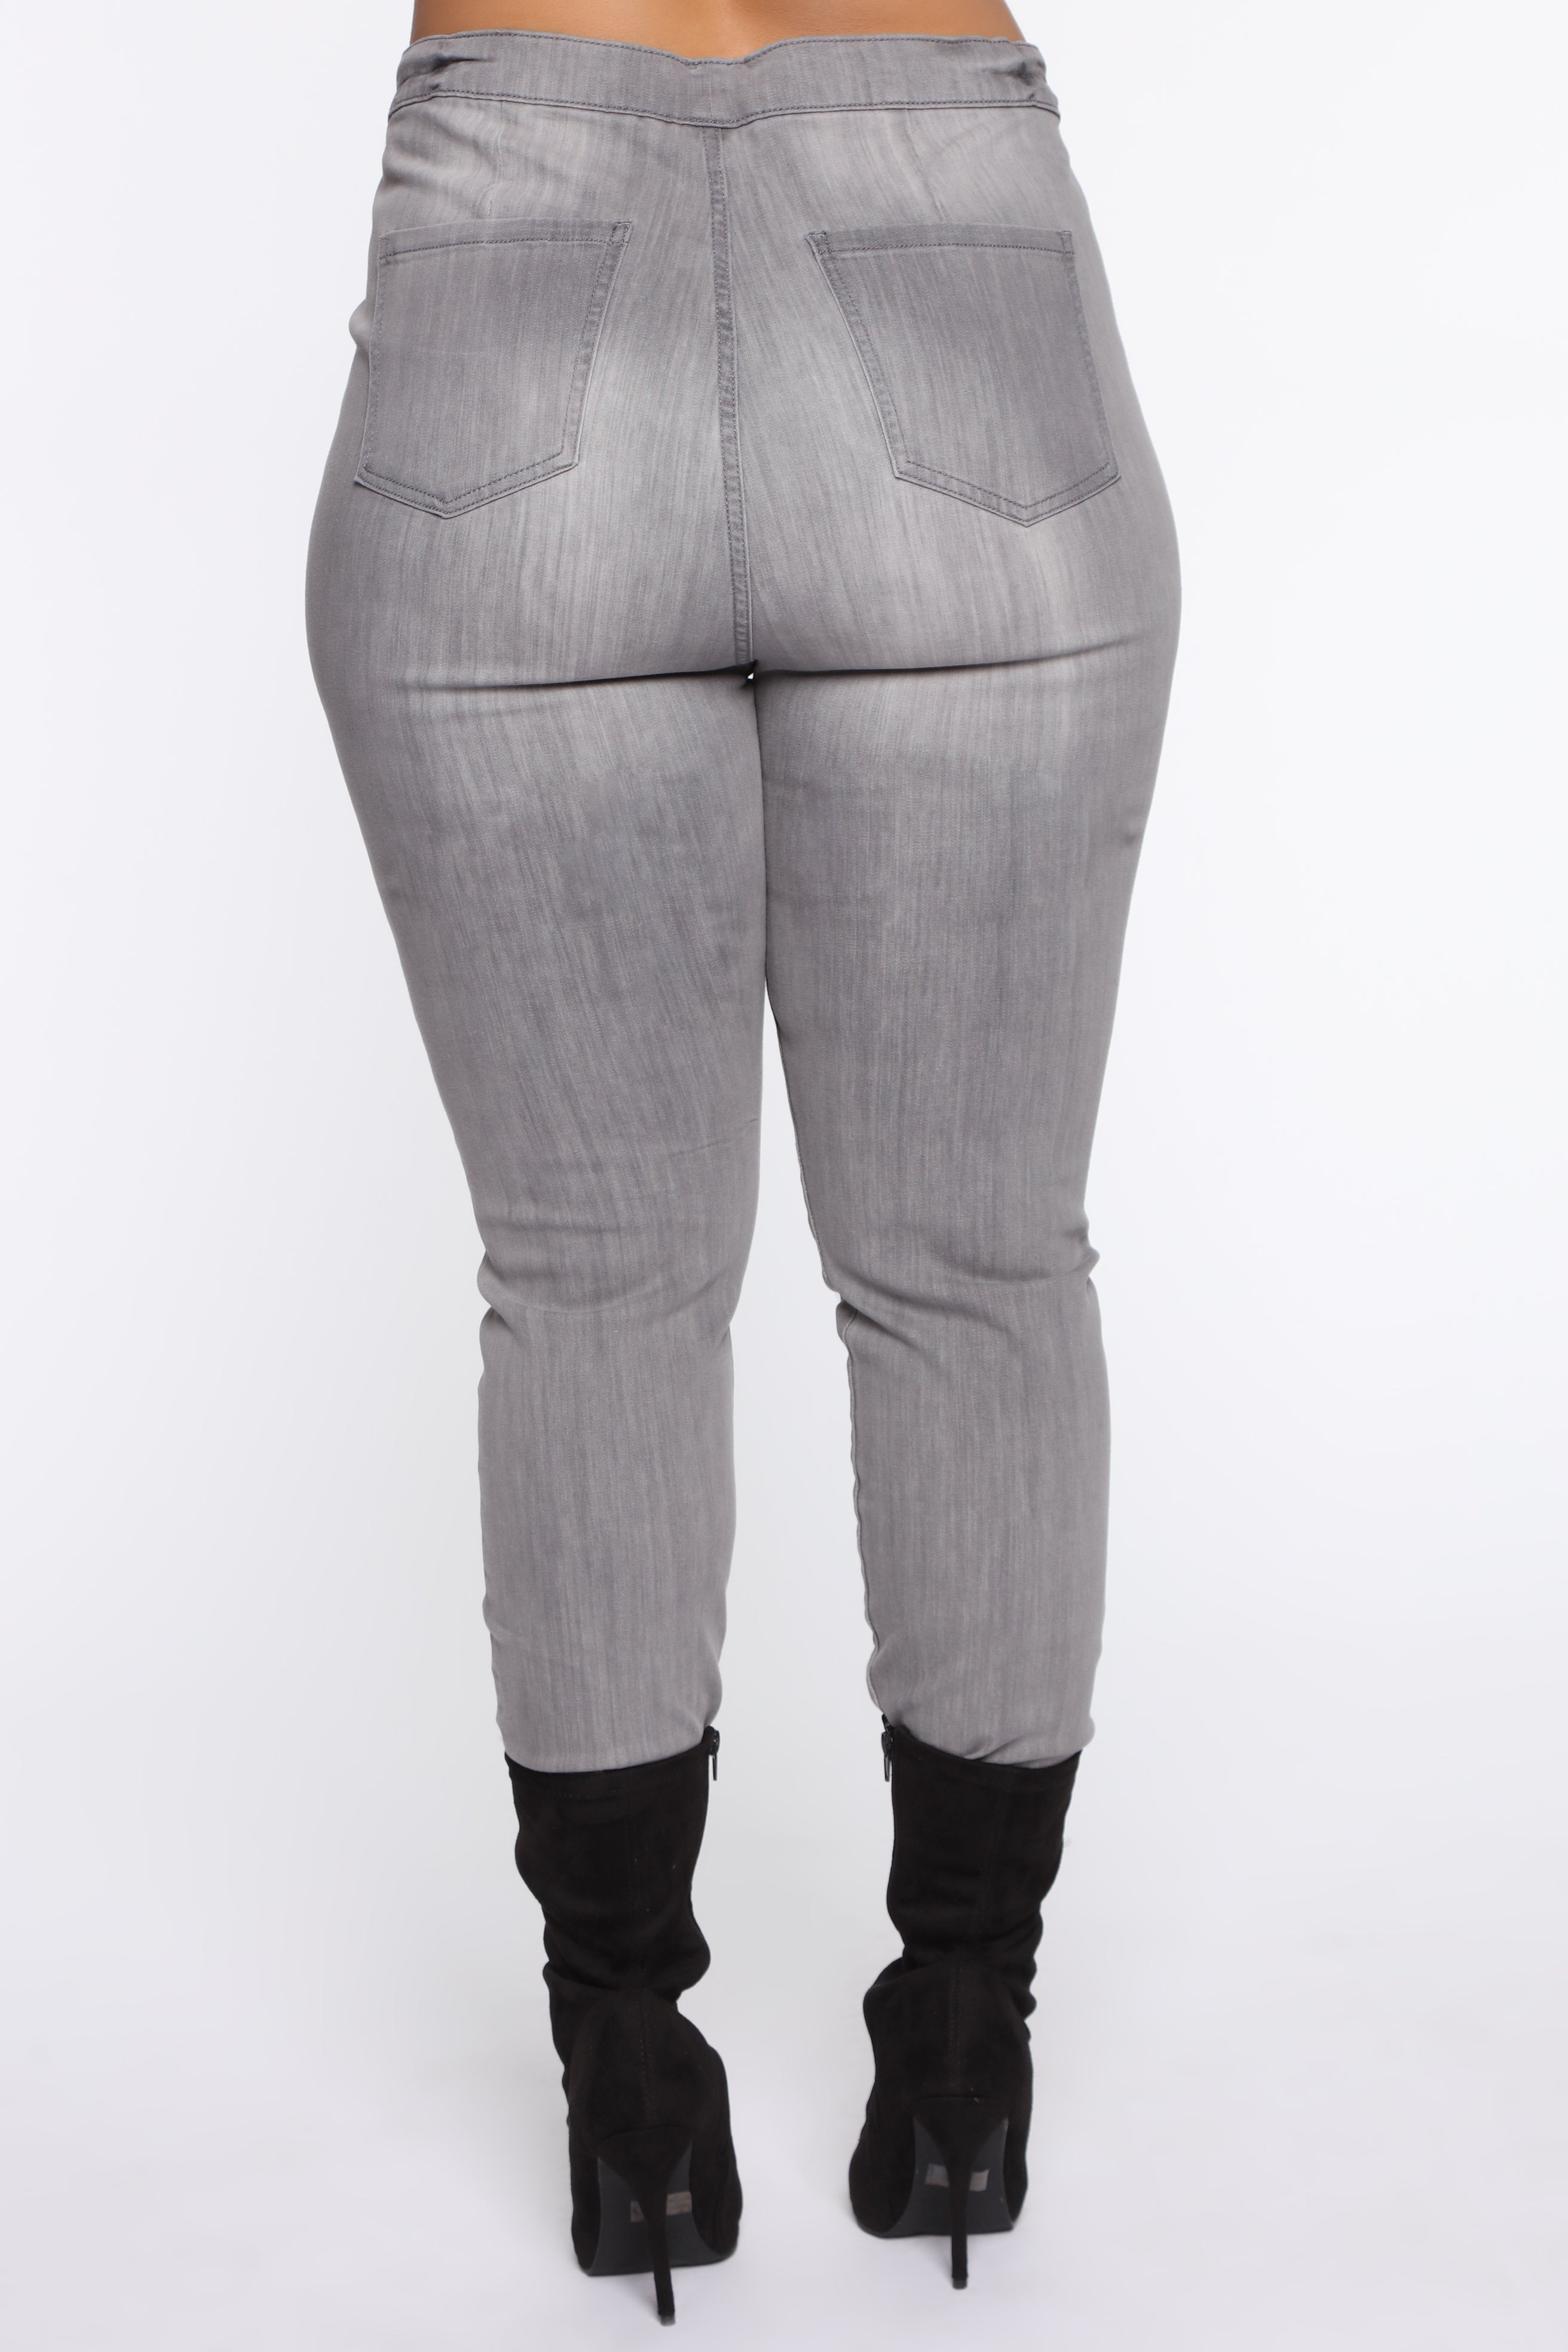 In The Night High Rise Skinny Jeans - Grey